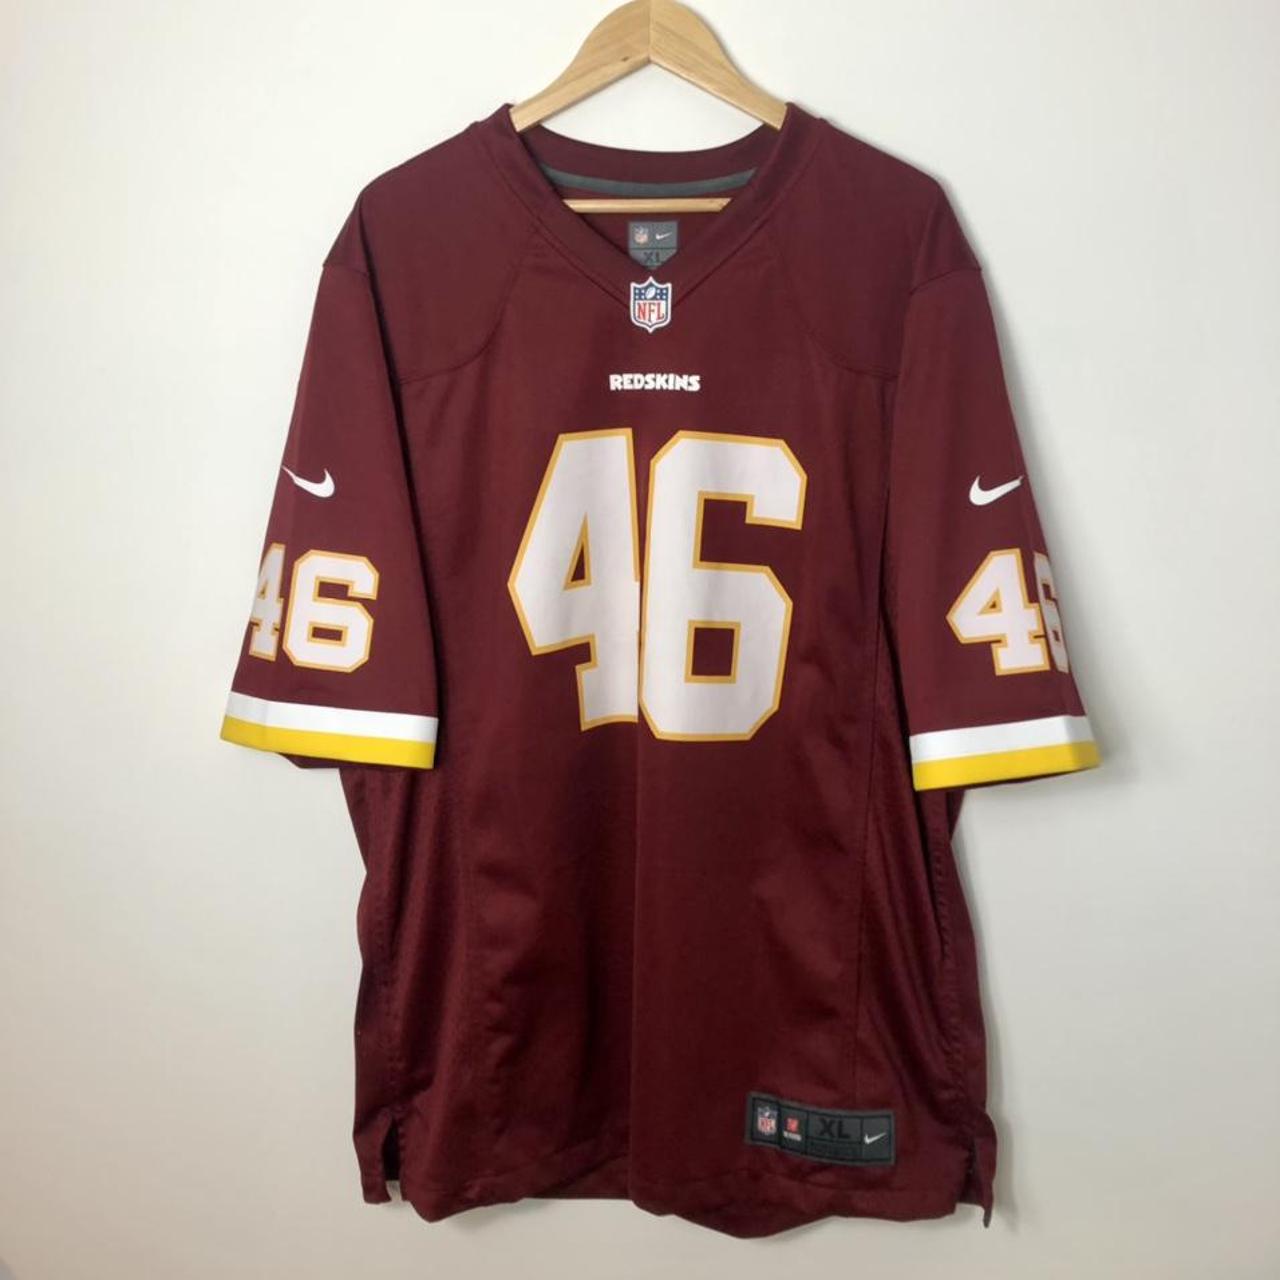 Product Image 1 - Authentic Nike NFL Jersey ✅

Genuine